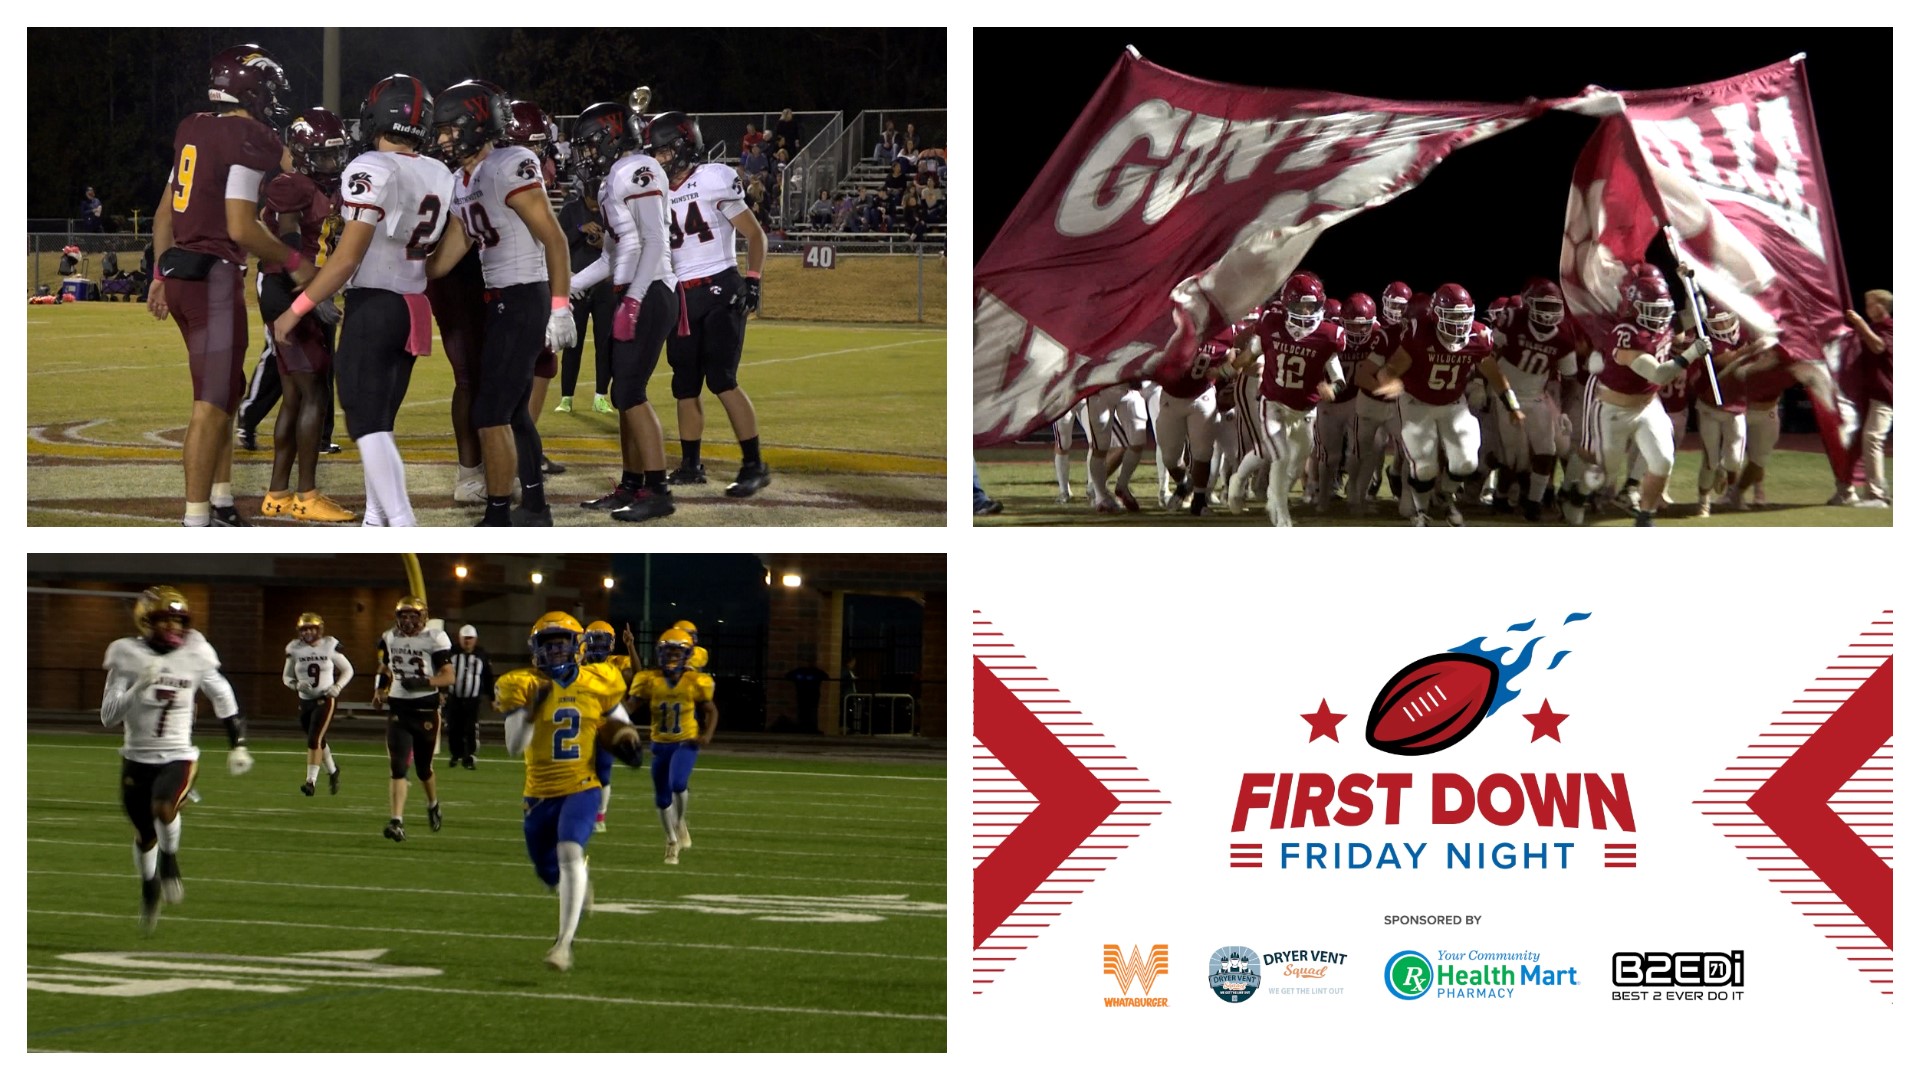 Week 10 of the high school football season is in the books. We've got highlights from the final week of the regular season on First Down Friday Night!